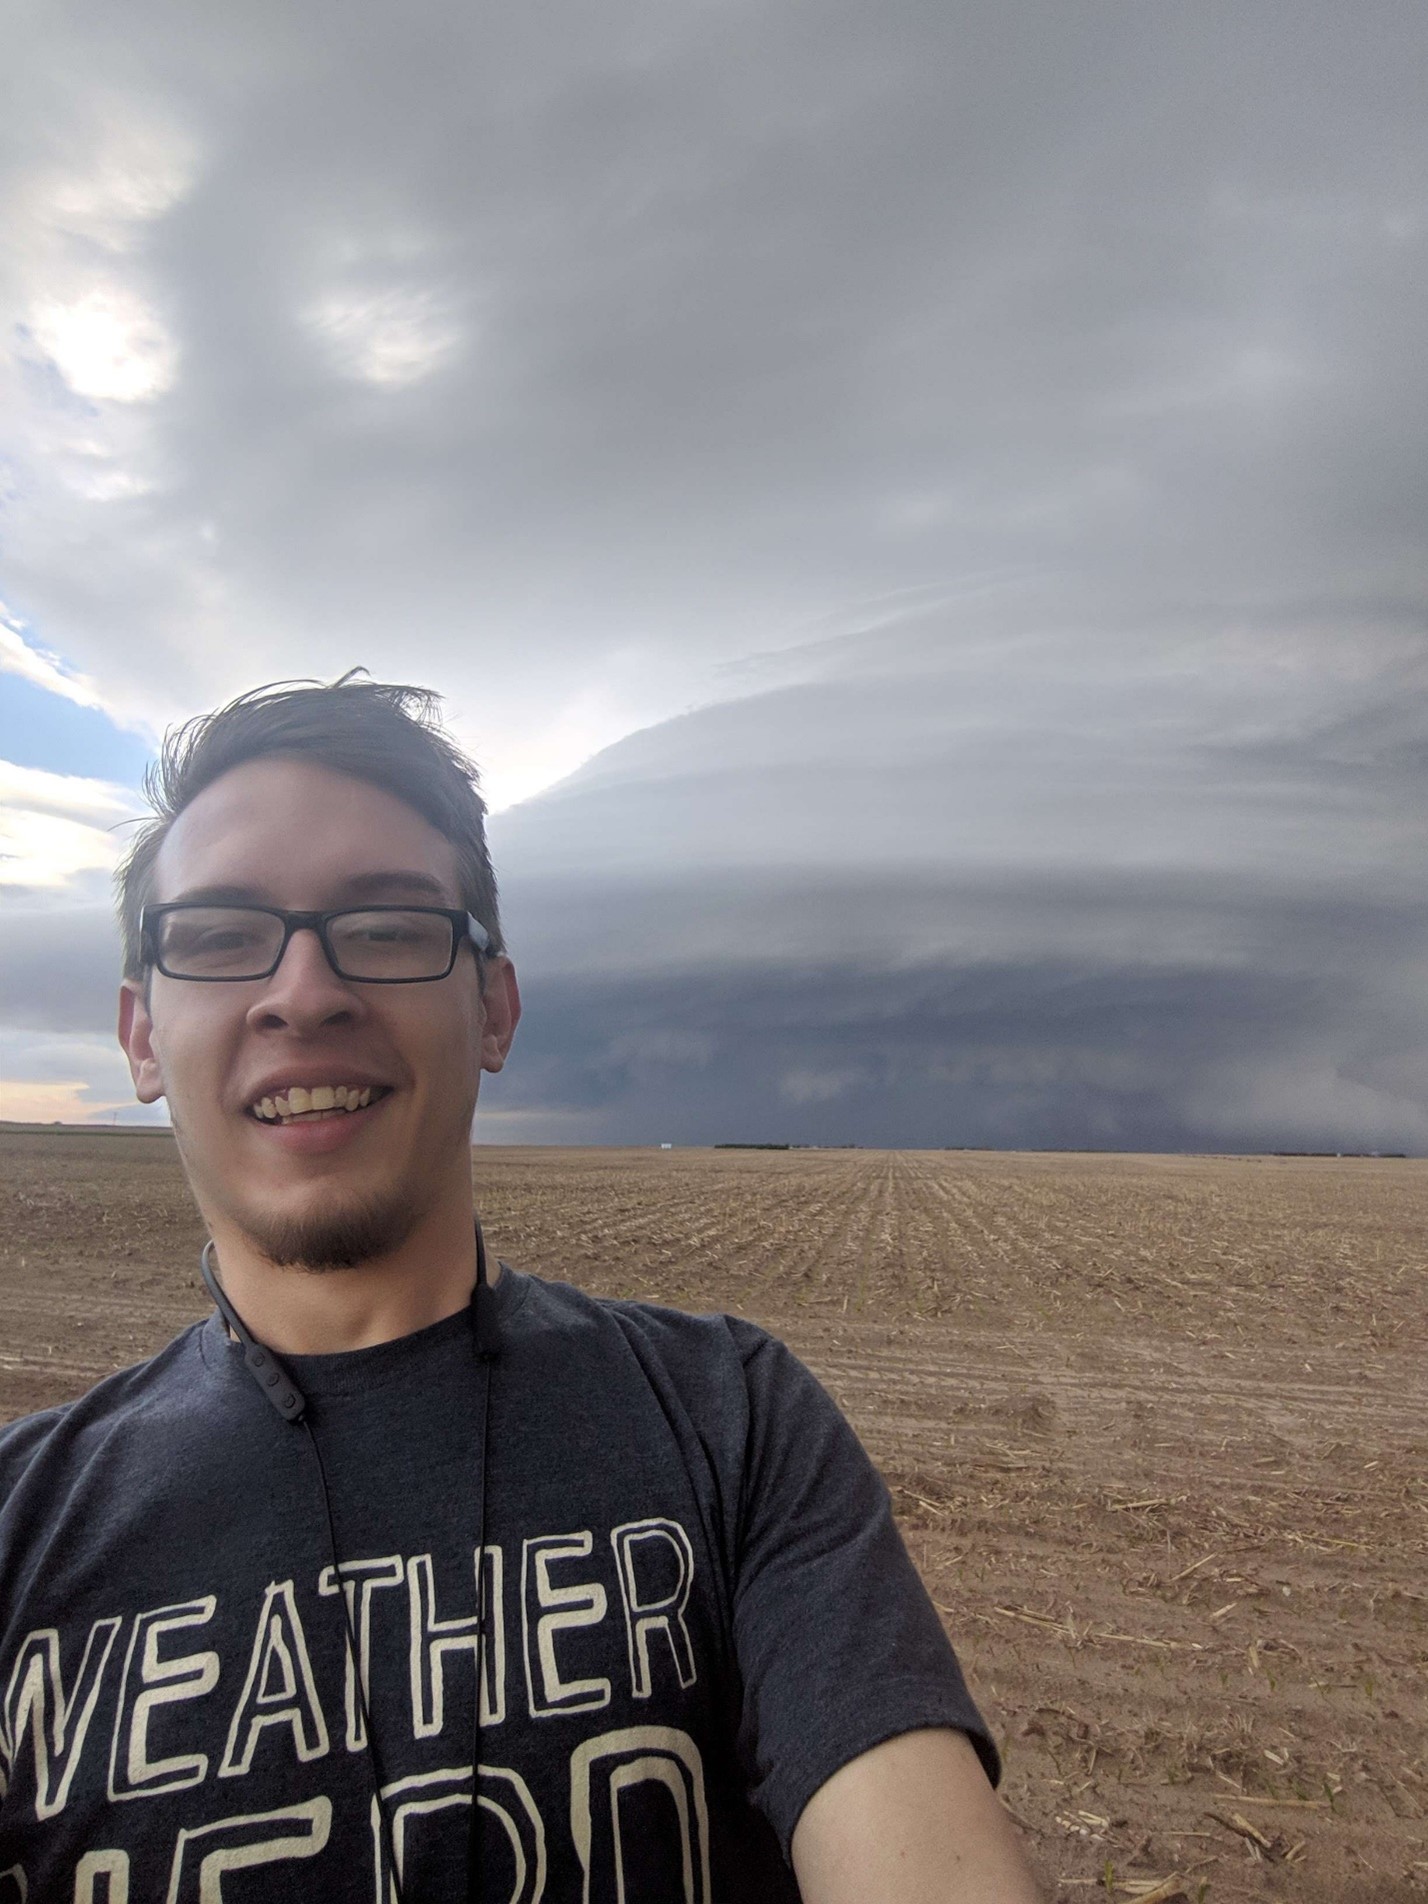 Skyview Weather Meteorologist Aaron O'Brien taking a selfie in front of a supercell thunderstorm while standing in a field.